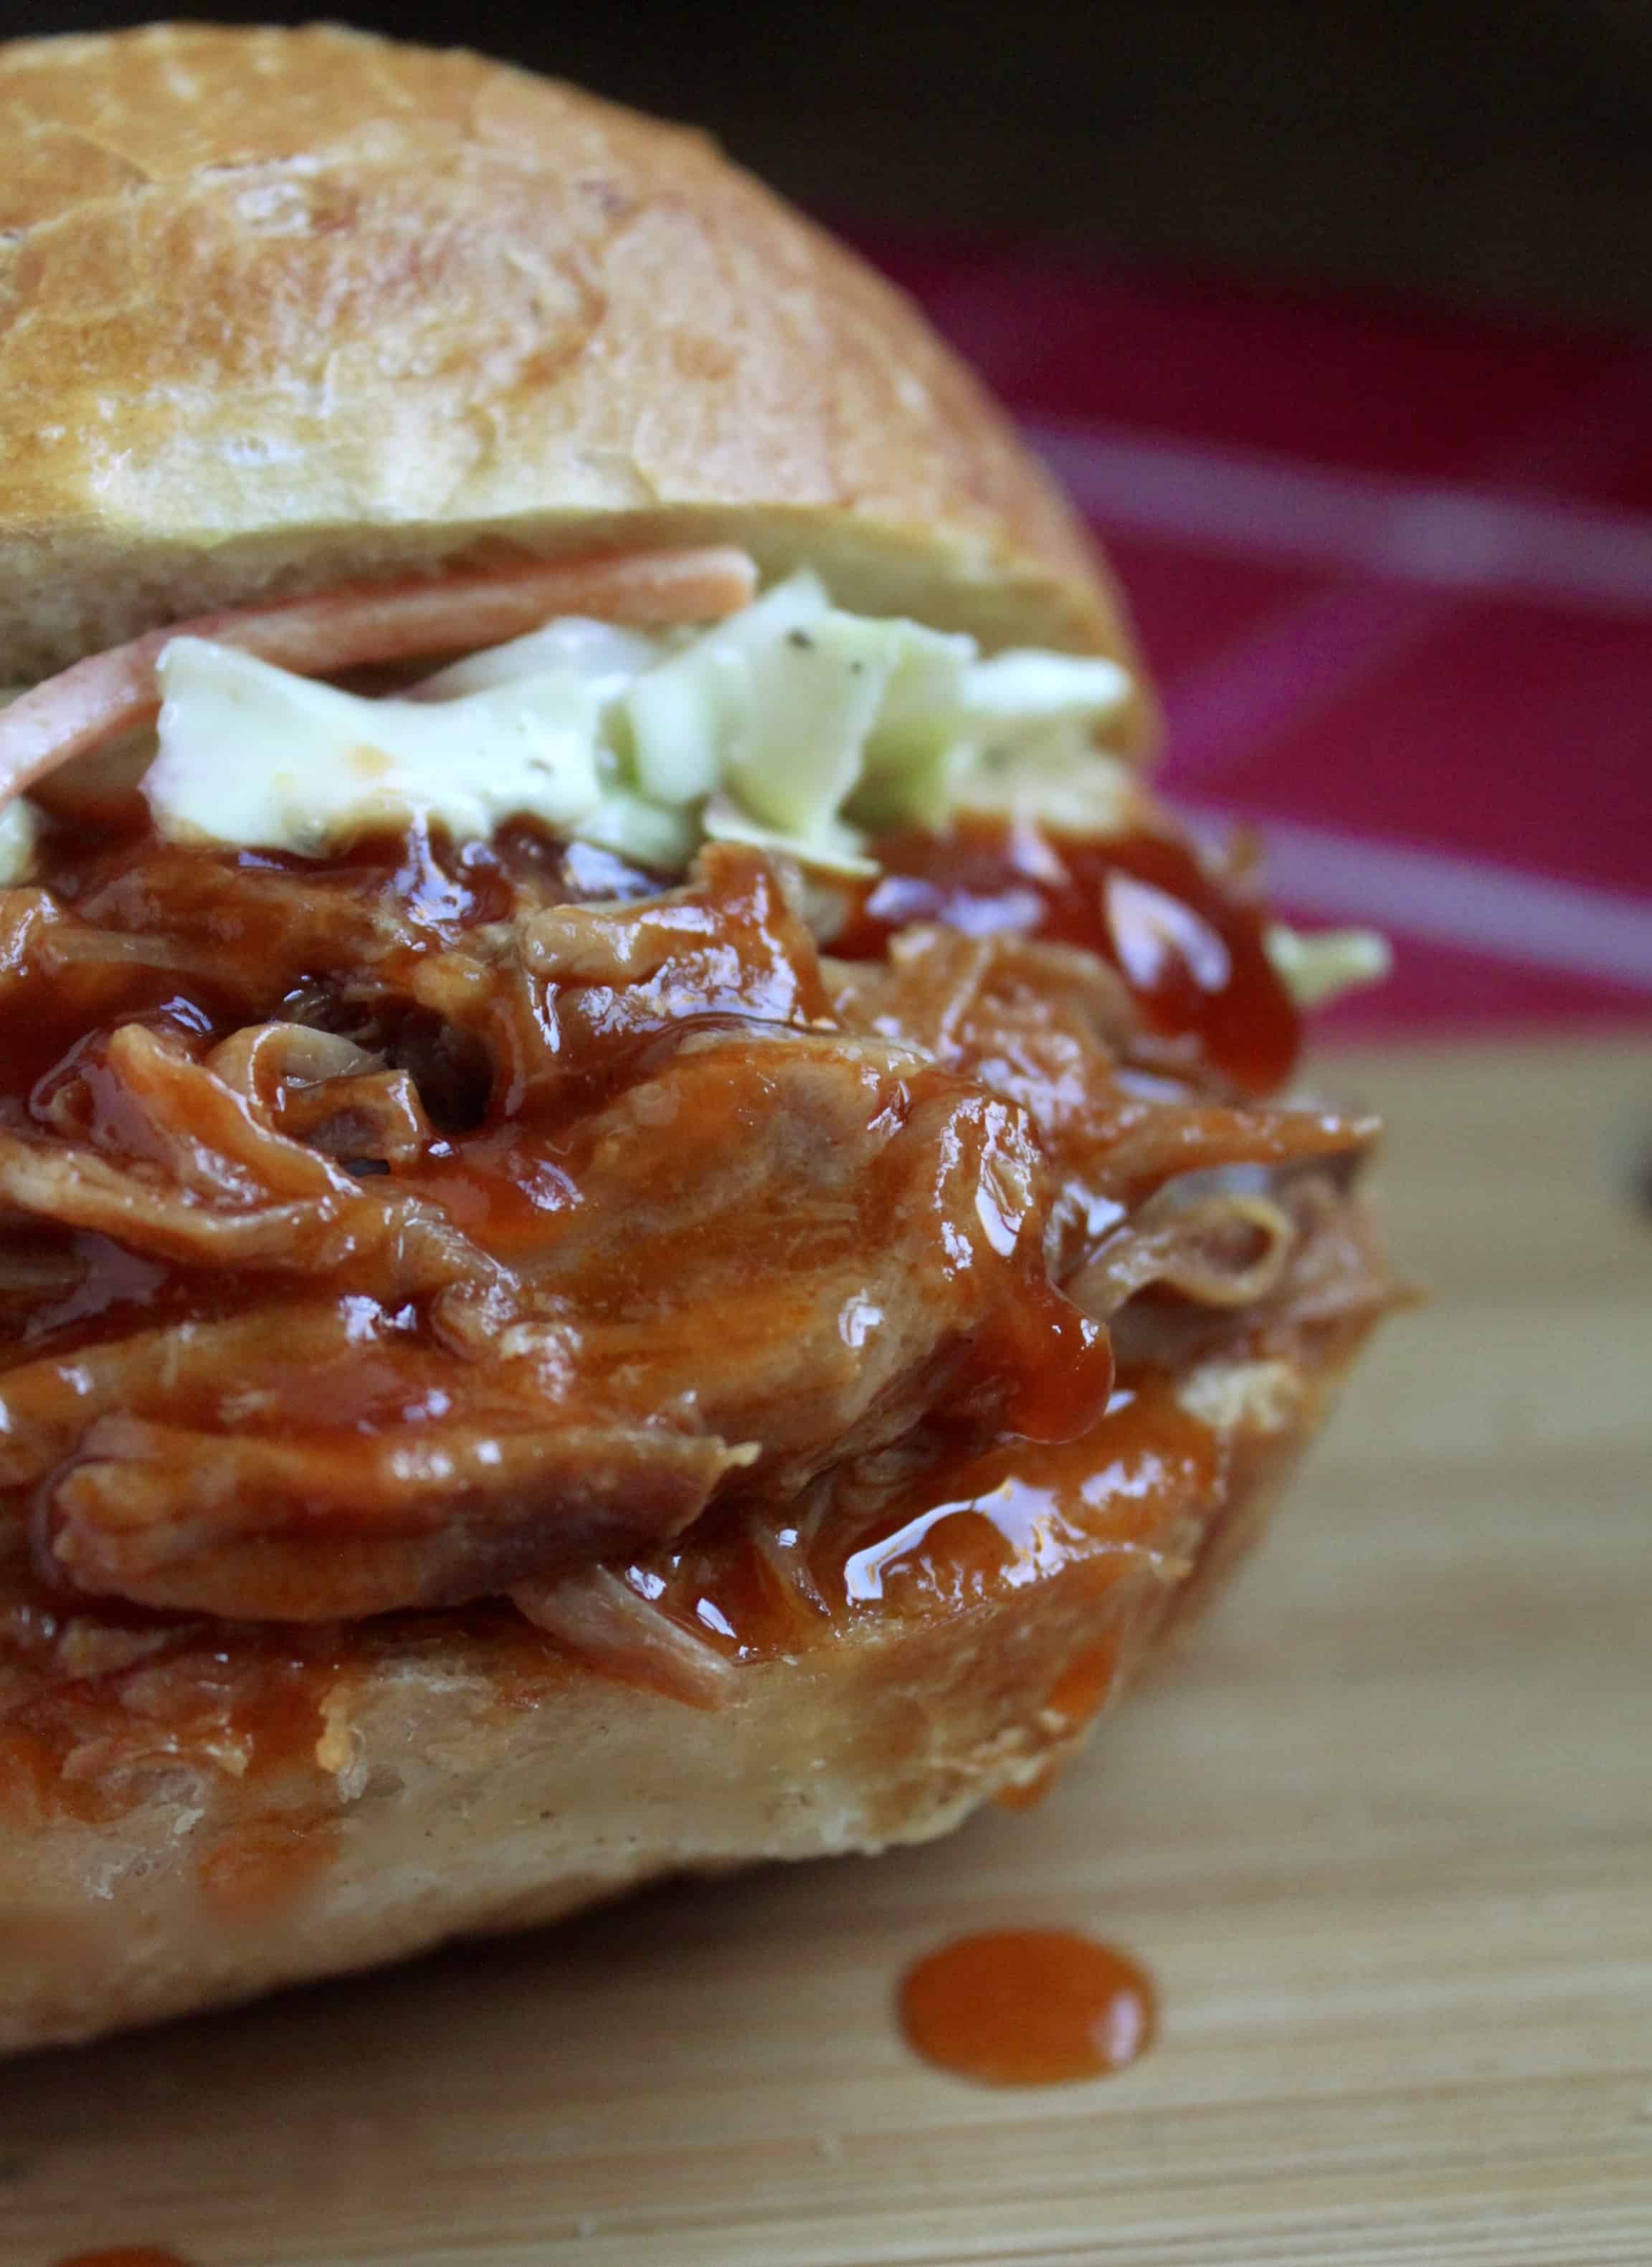 slow cooker pulled pork sandwiches